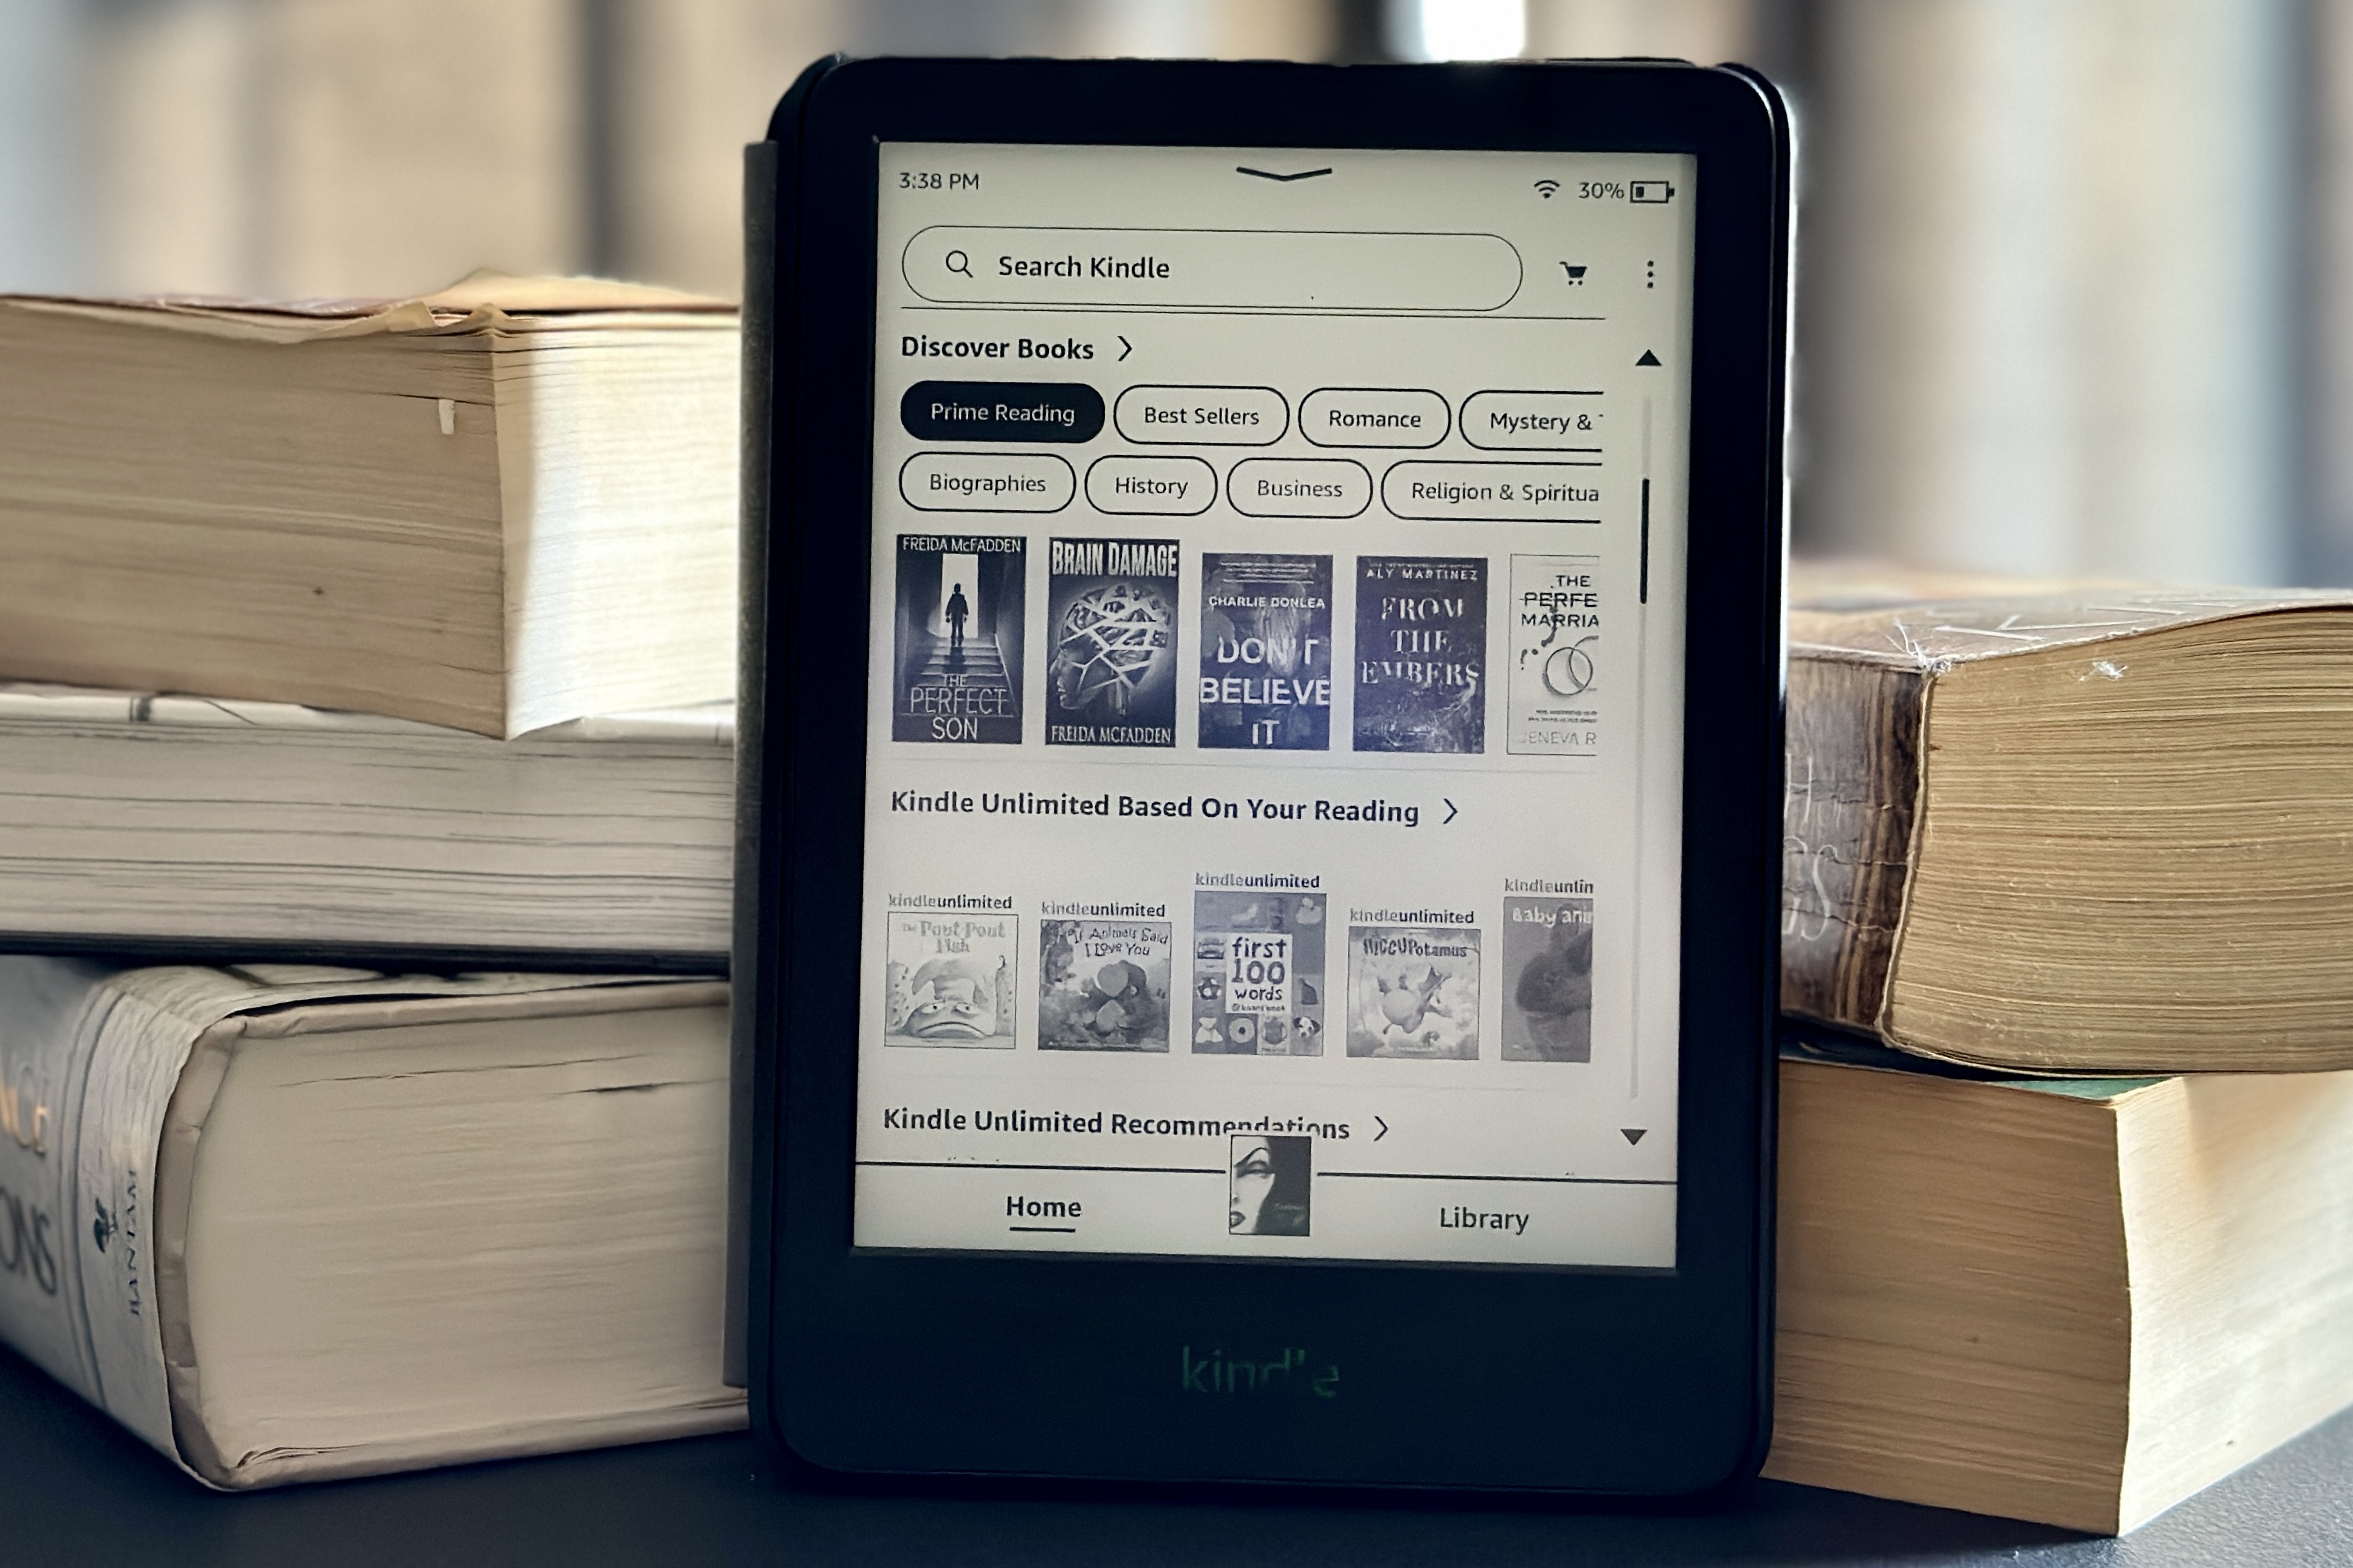 I used a Kindle for the first time in 10 years and it totally changed how I read